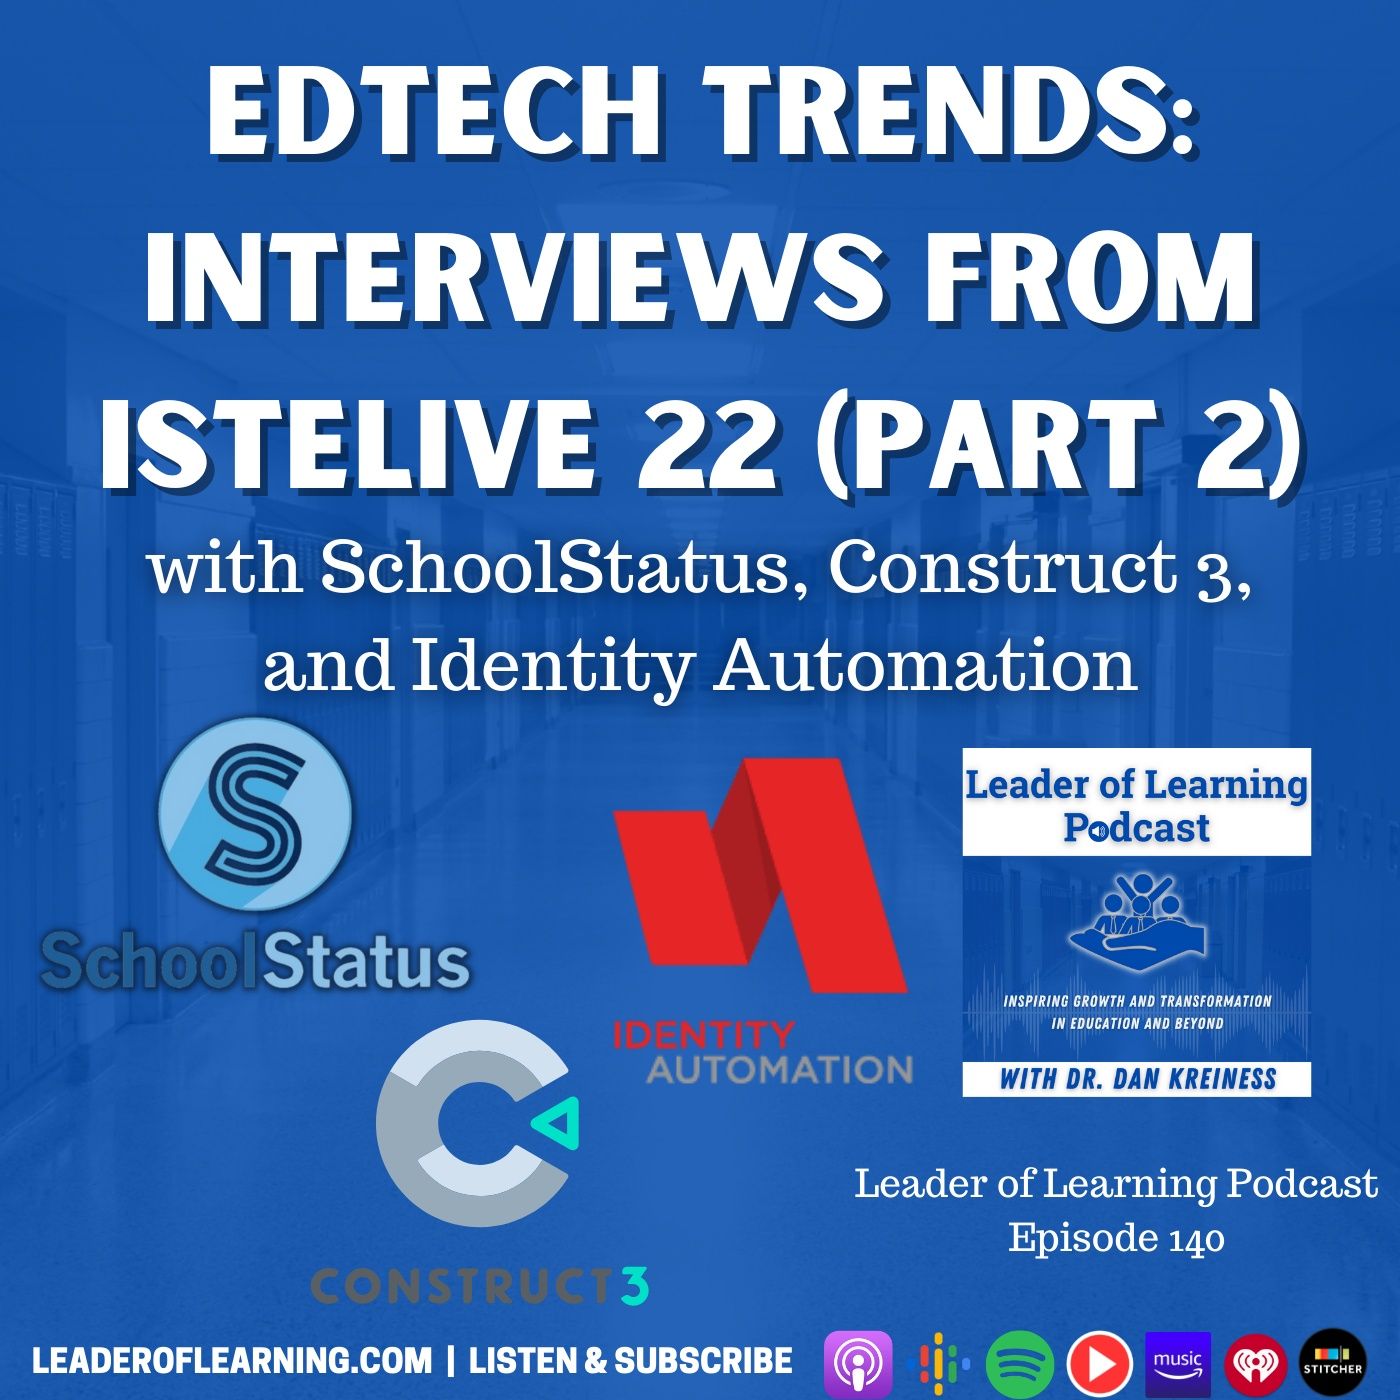 EdTech Trends: Interviews from ISTE Live 22 (Part 2) Image